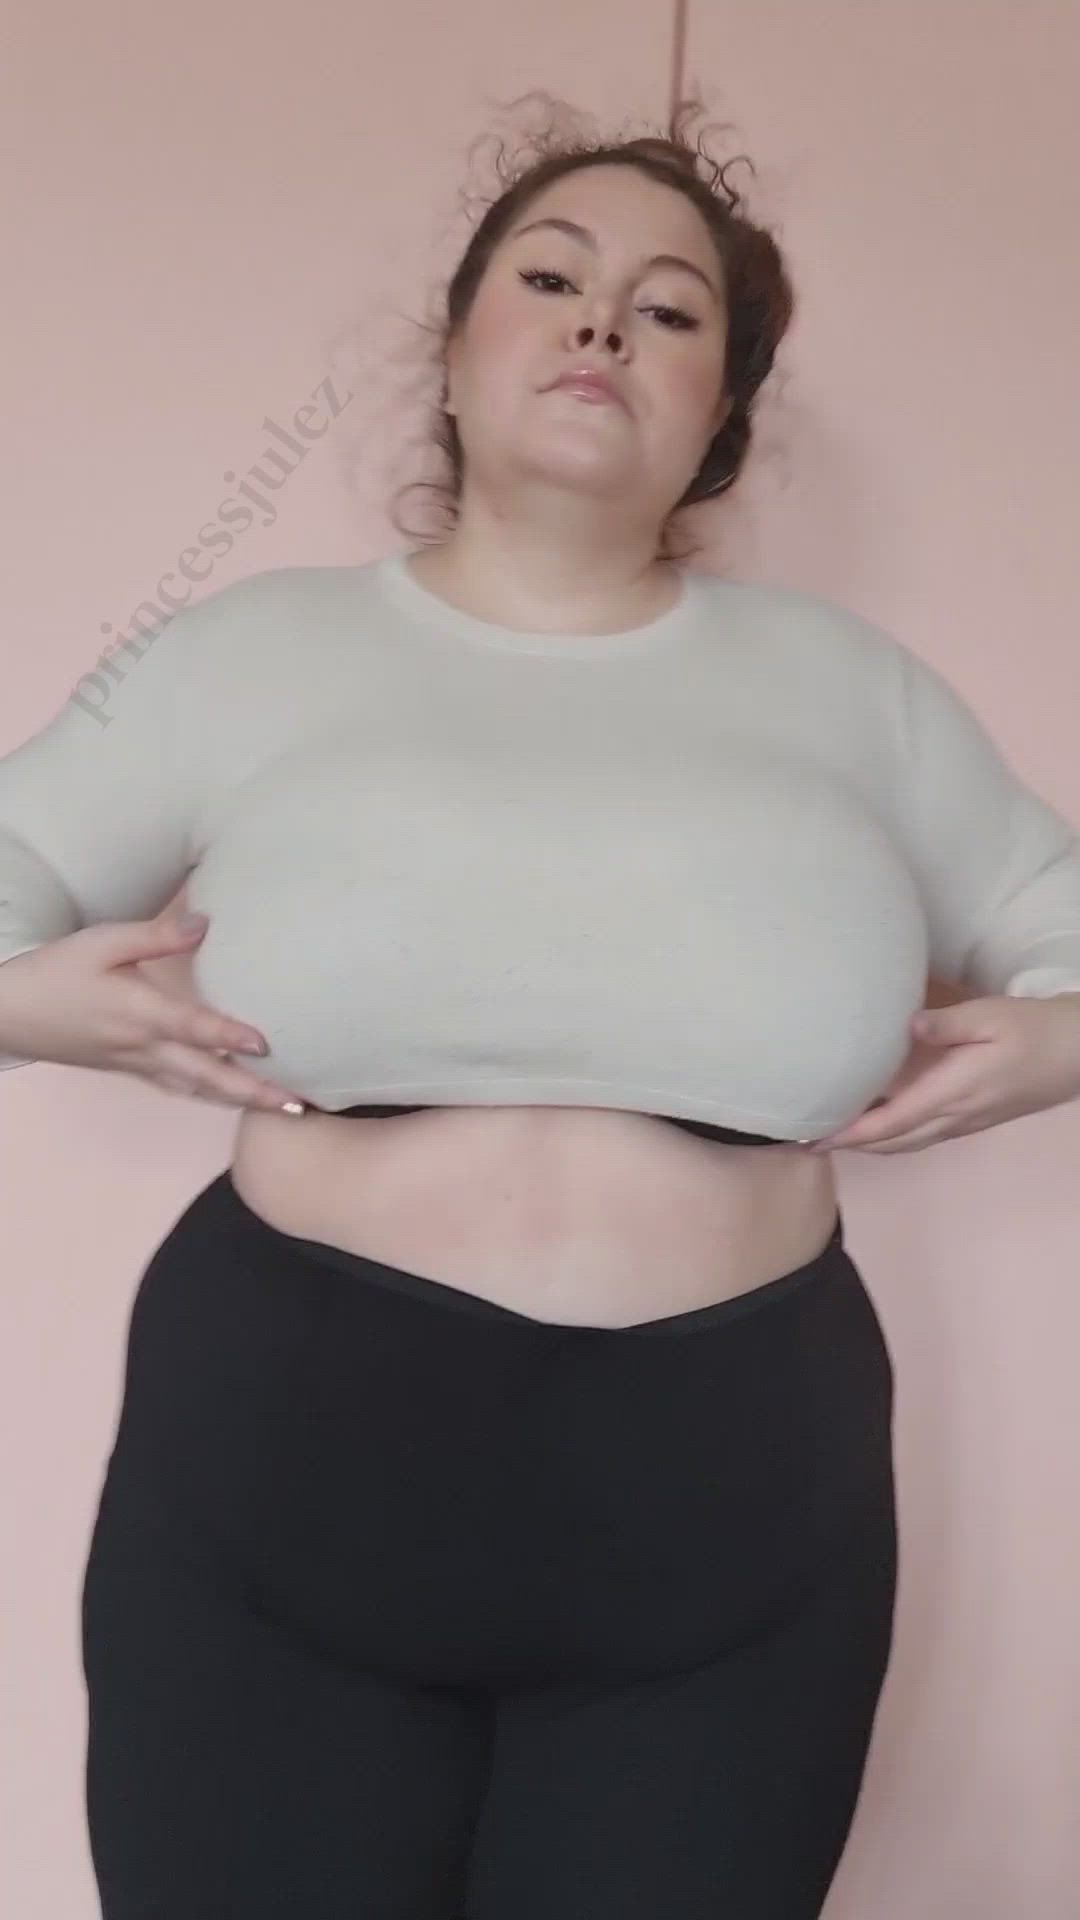 Big Tits porn video with onlyfans model Juliana <strong>@princessjulez</strong>